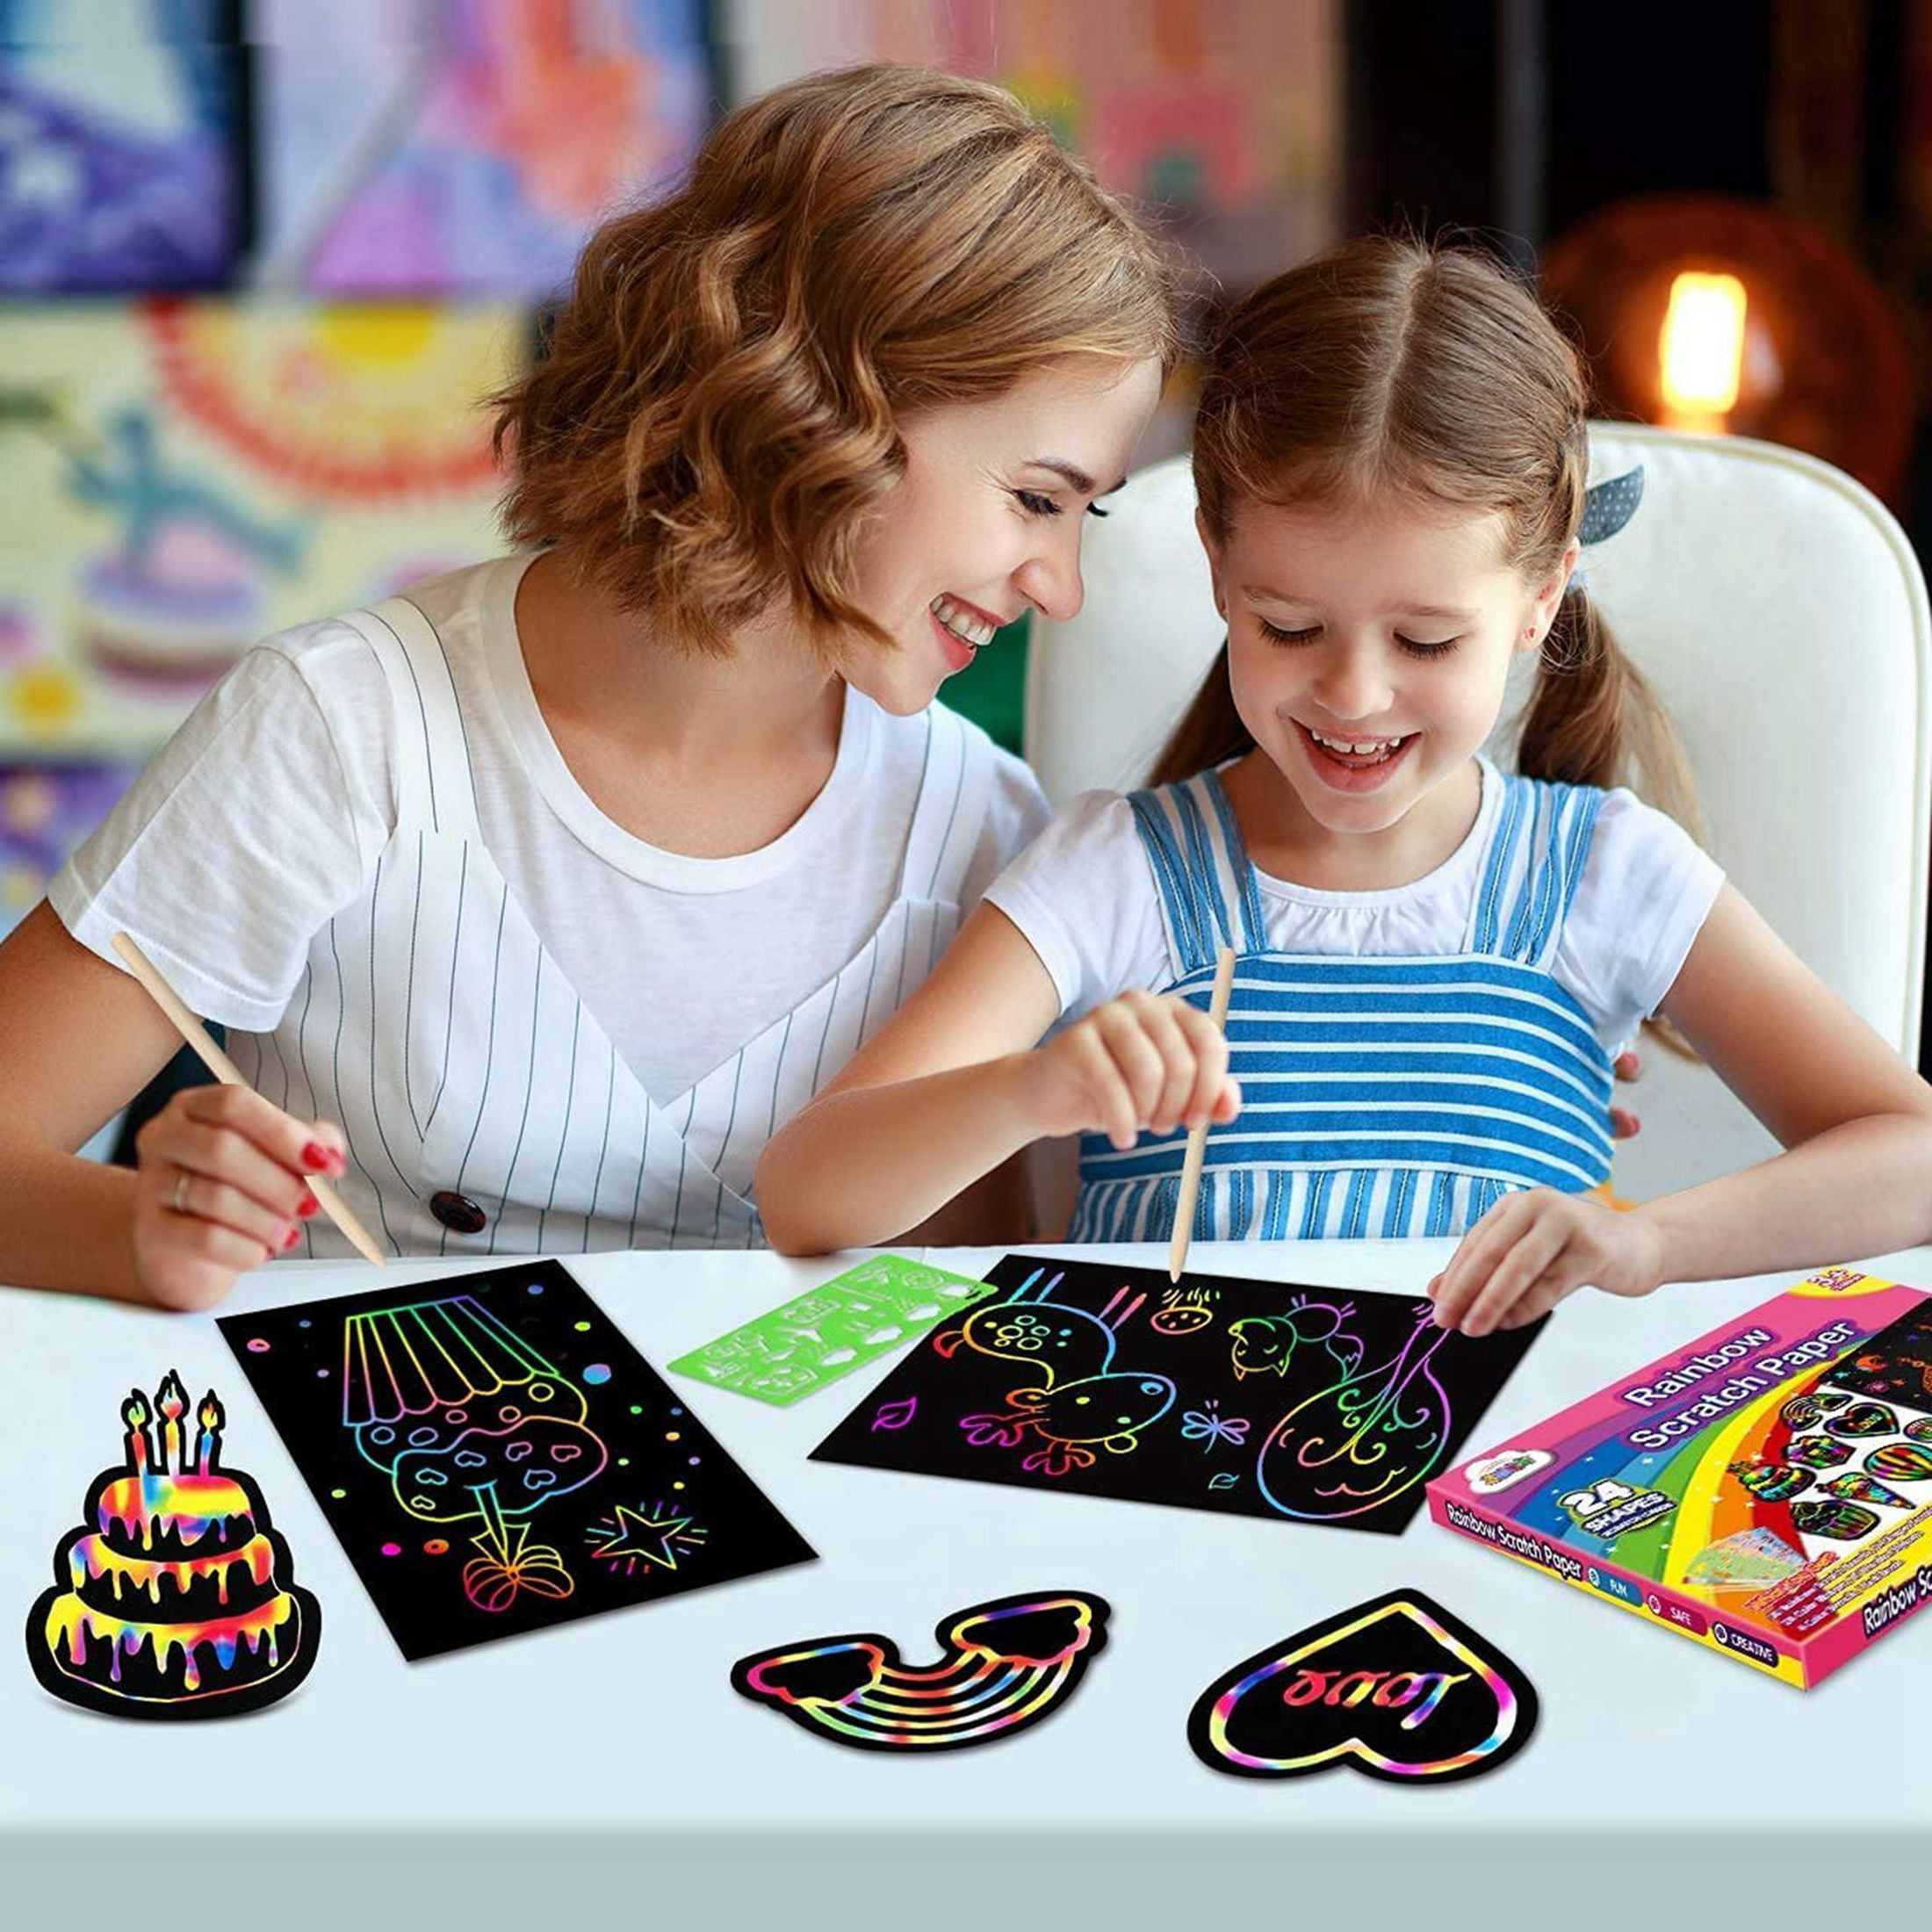  ZMLM Gift Christmas for Girl Art-Craft Kit: Rainbow Scratch  Paper Magic Art Craft Project Supply Toddler Drawing Activity Kid Travel  Toy Age 3-12 Year Old Birthday Gift : Toys & Games